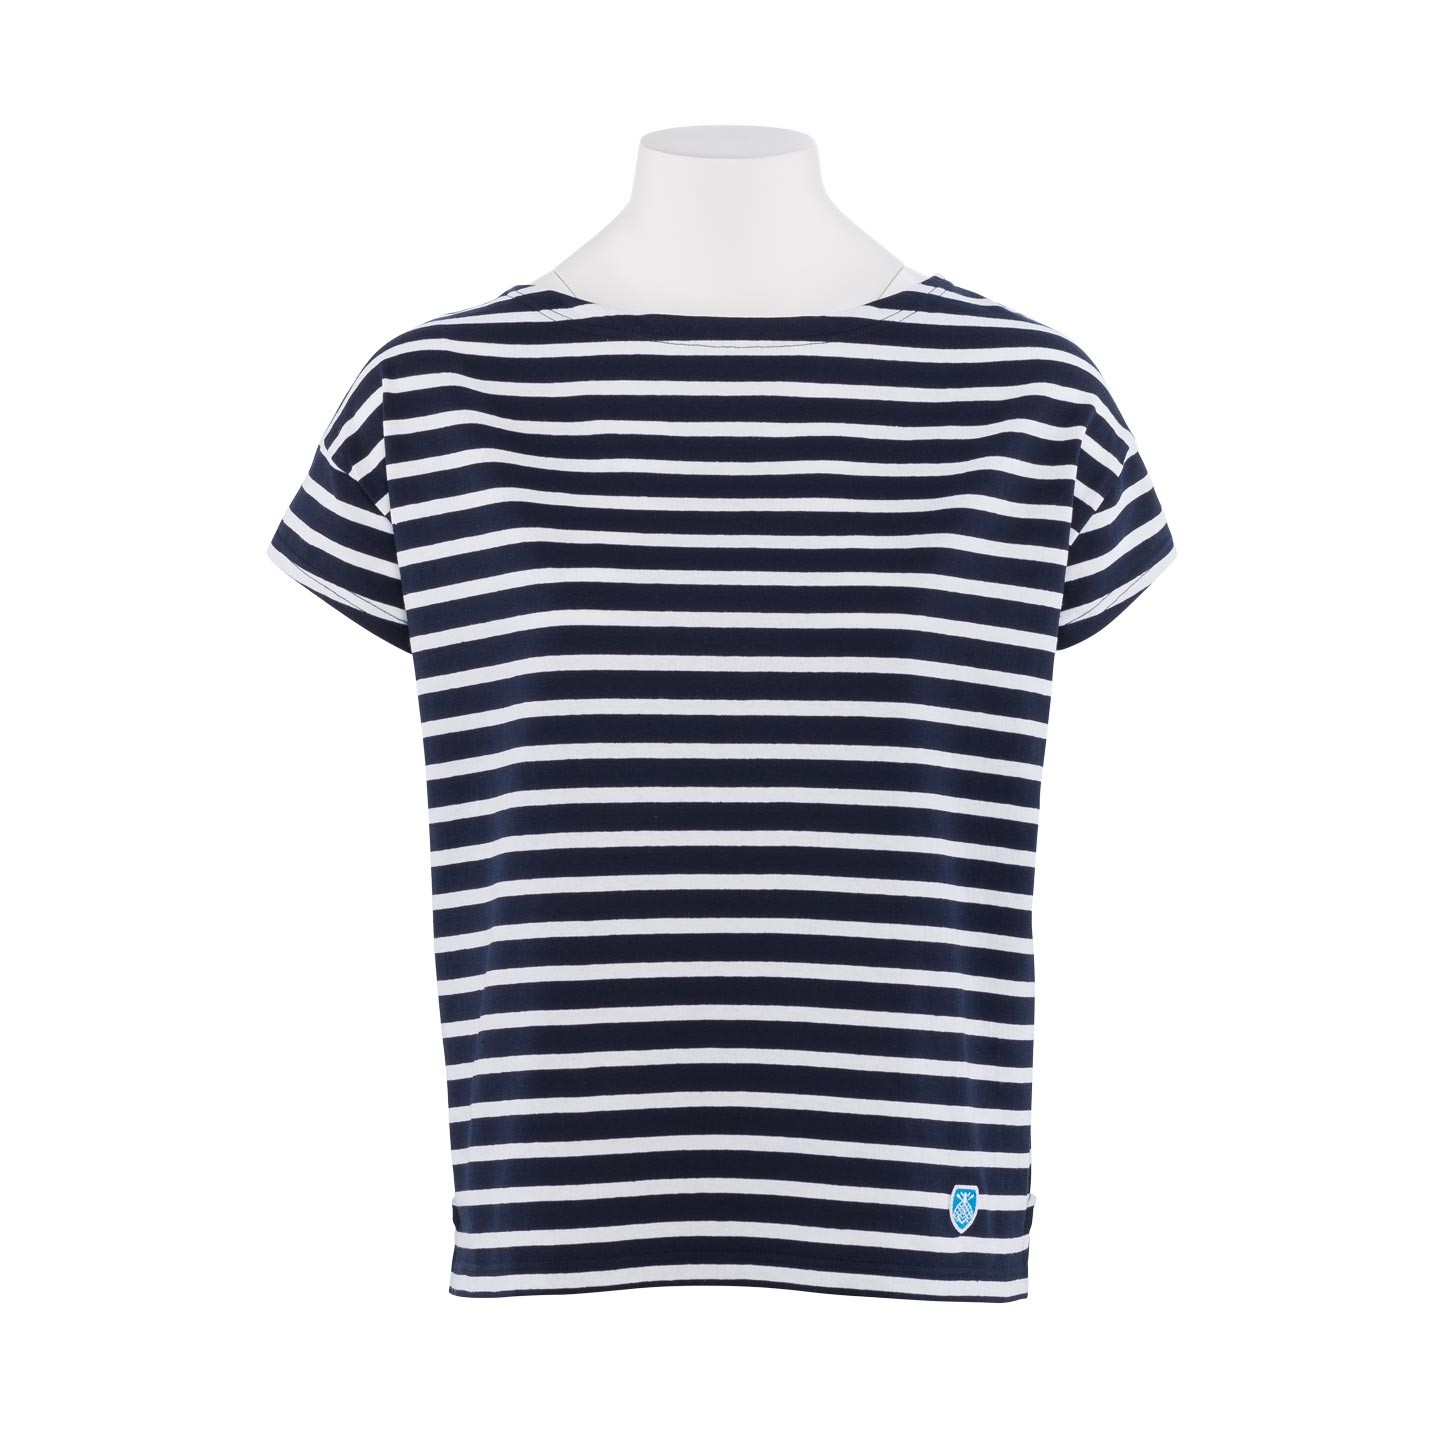 Short striped shirt Navy / White, unisex made in France Orcival